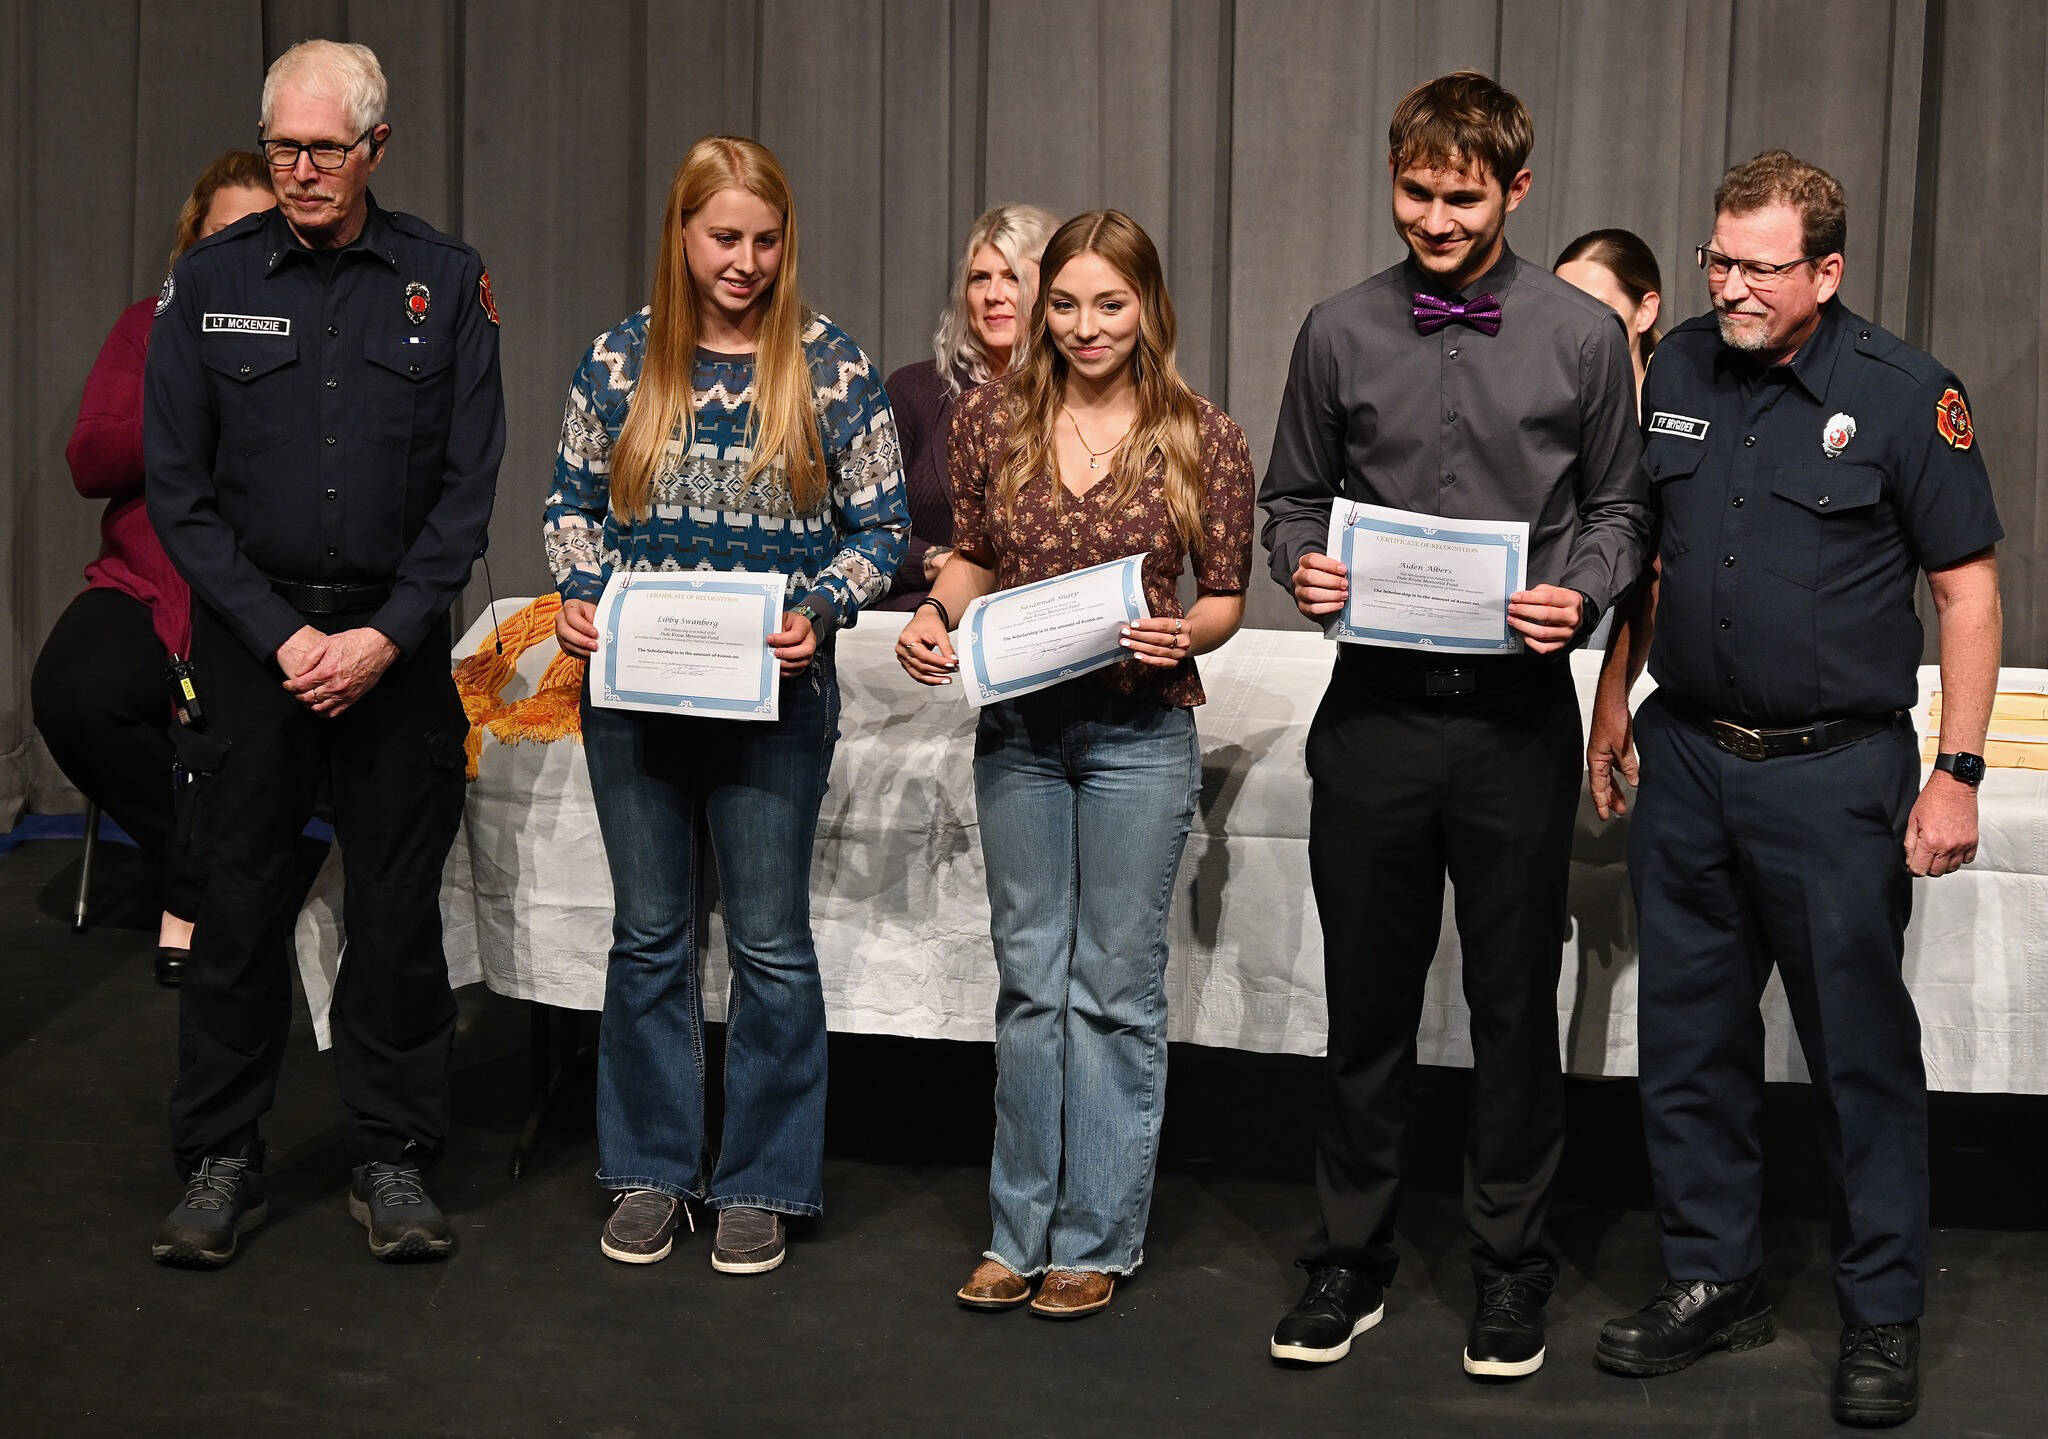 Photos by Jay Cline
At Sequim High School’s Scholarship Night on June 5, Sequim High seniors (from left) Libby Swanberg, Susannah Sharp and Aiden Albers receive Dale Kruse Memorial Scholarship funds from John McKenzie (far left) and John Brygider from Clallam County Fire District 3.